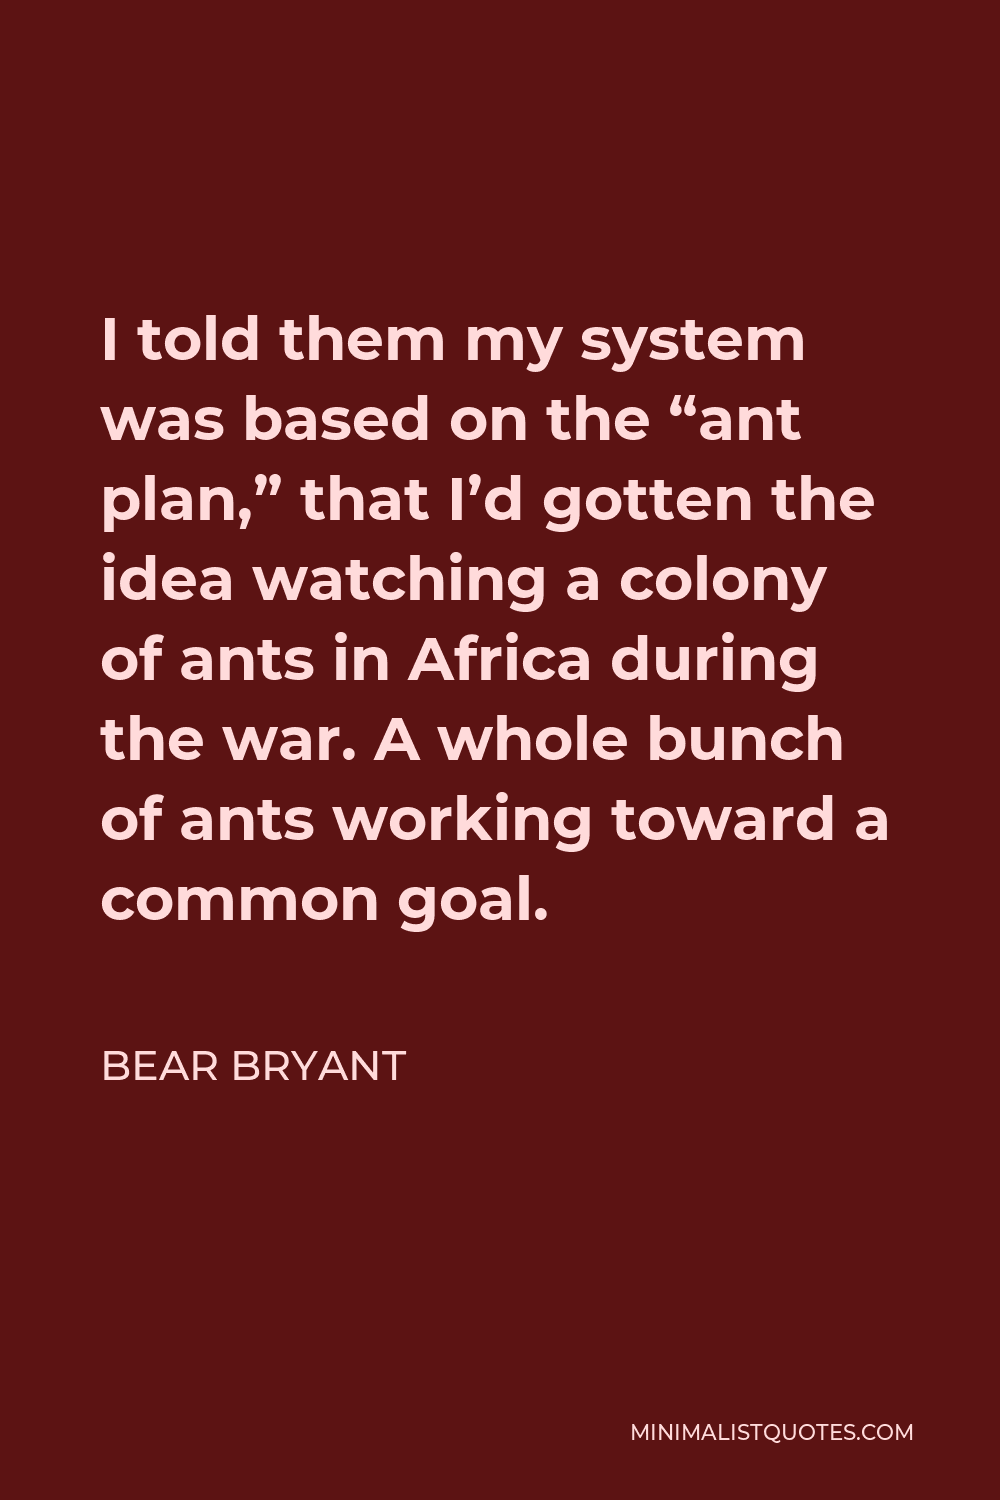 Bear Bryant Quote - I told them my system was based on the “ant plan,” that I’d gotten the idea watching a colony of ants in Africa during the war. A whole bunch of ants working toward a common goal.